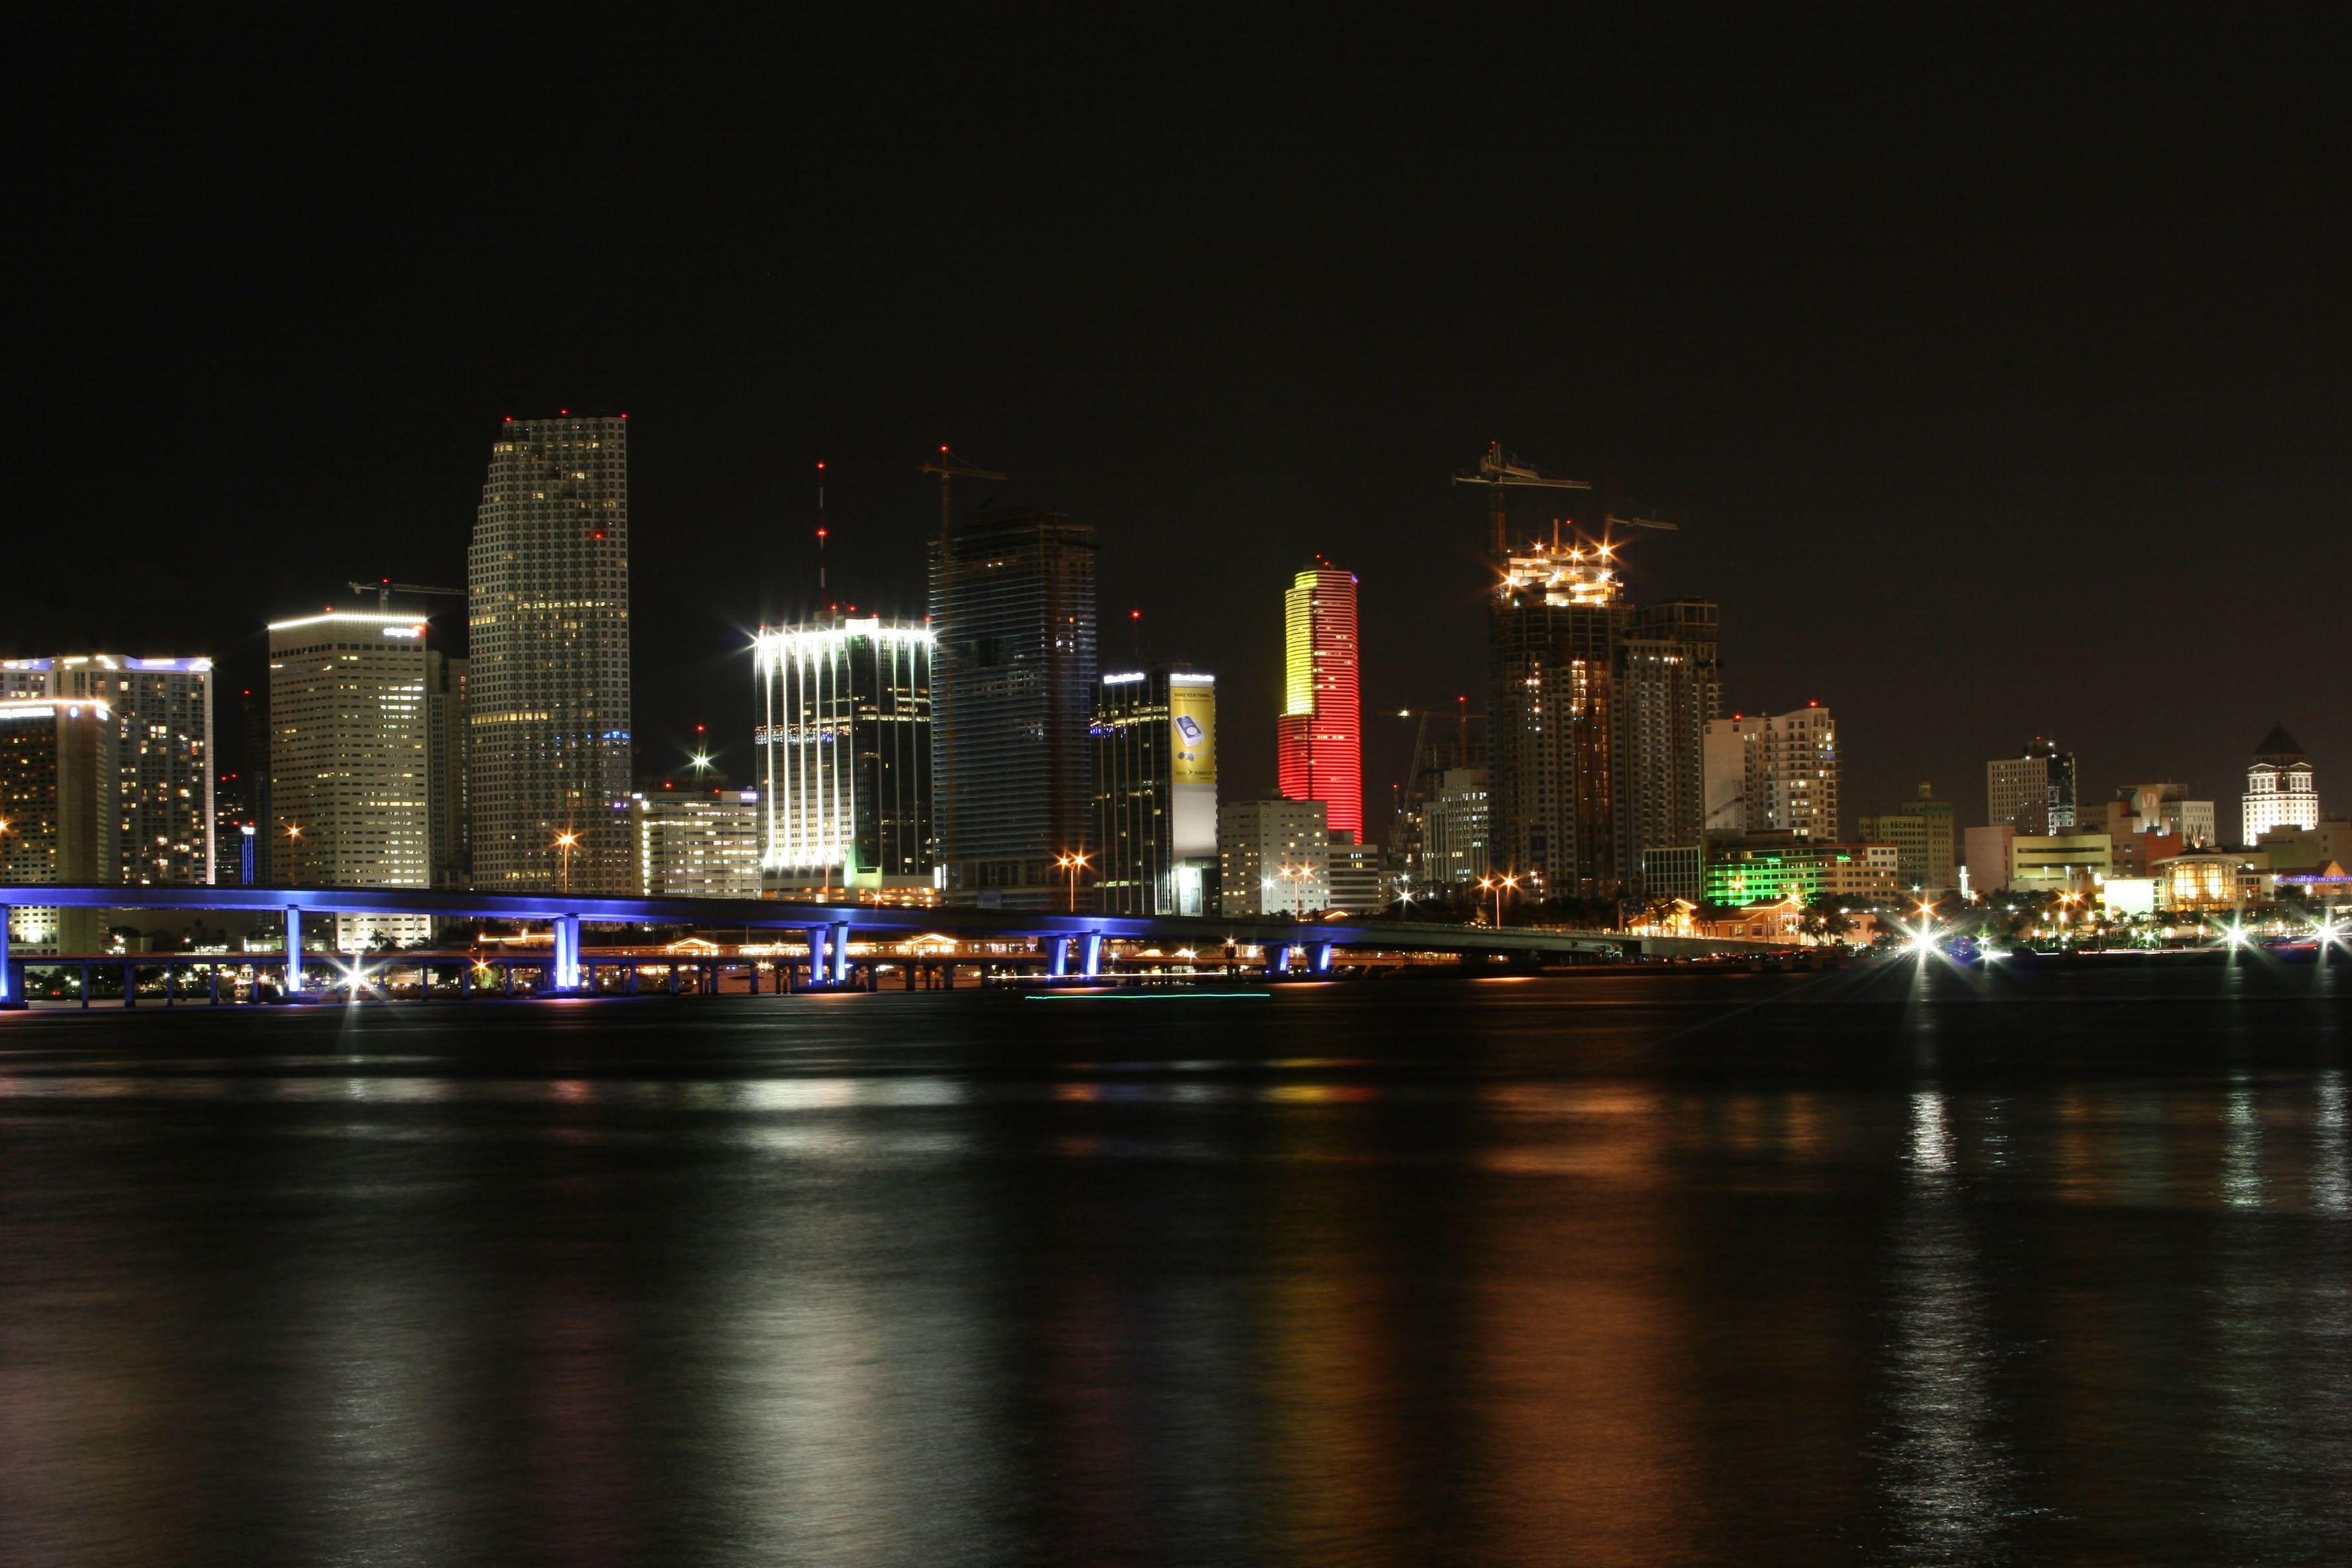 lg looking for 5760x1080 panorama of the miami skyline 3504x2336